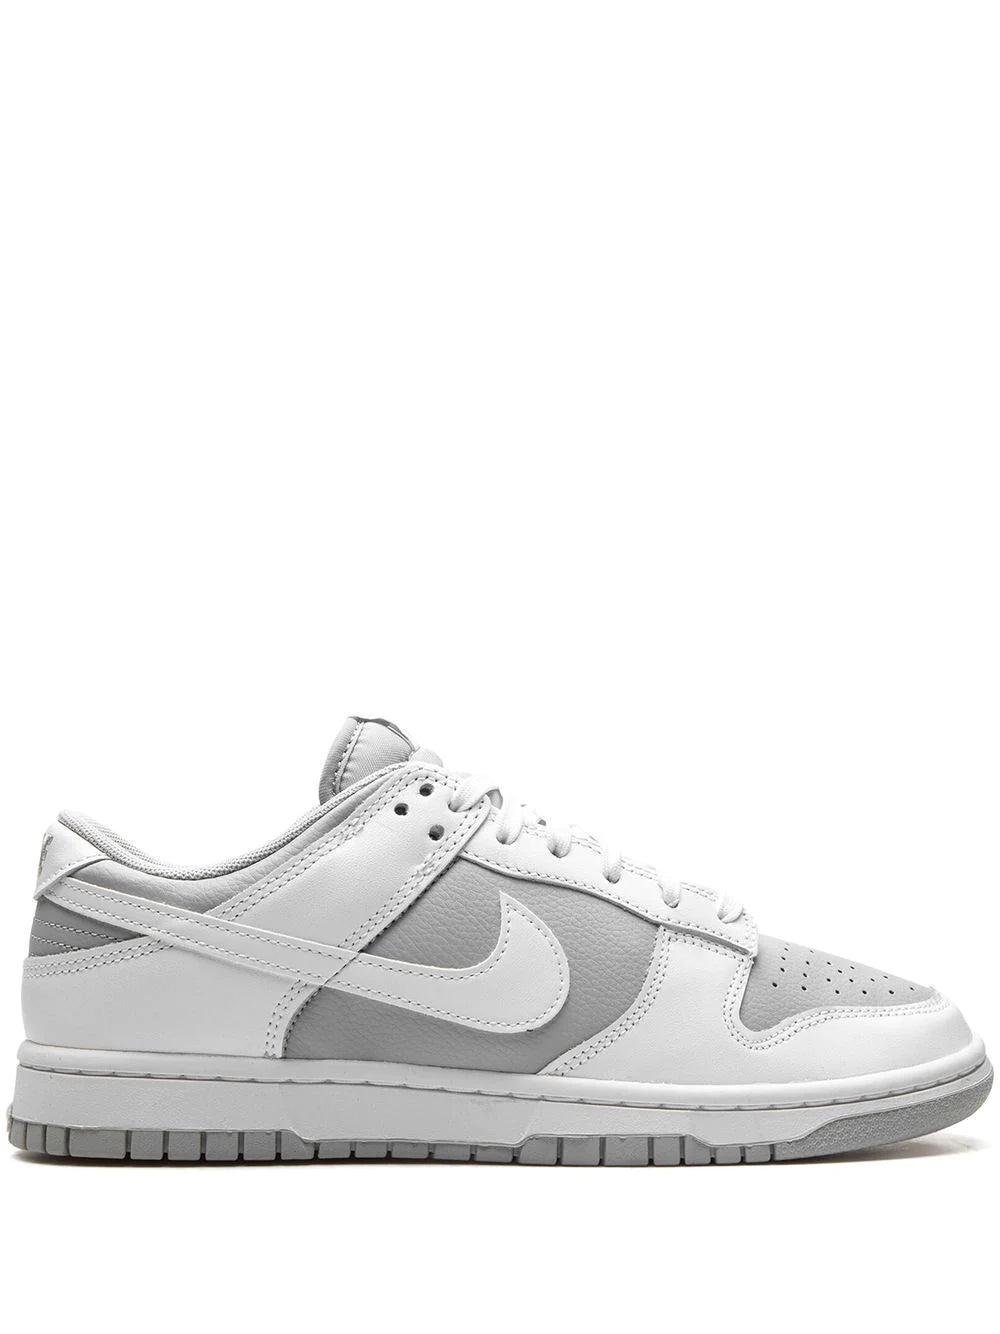 Nike Dunks Low Retro White And Grey Trainers